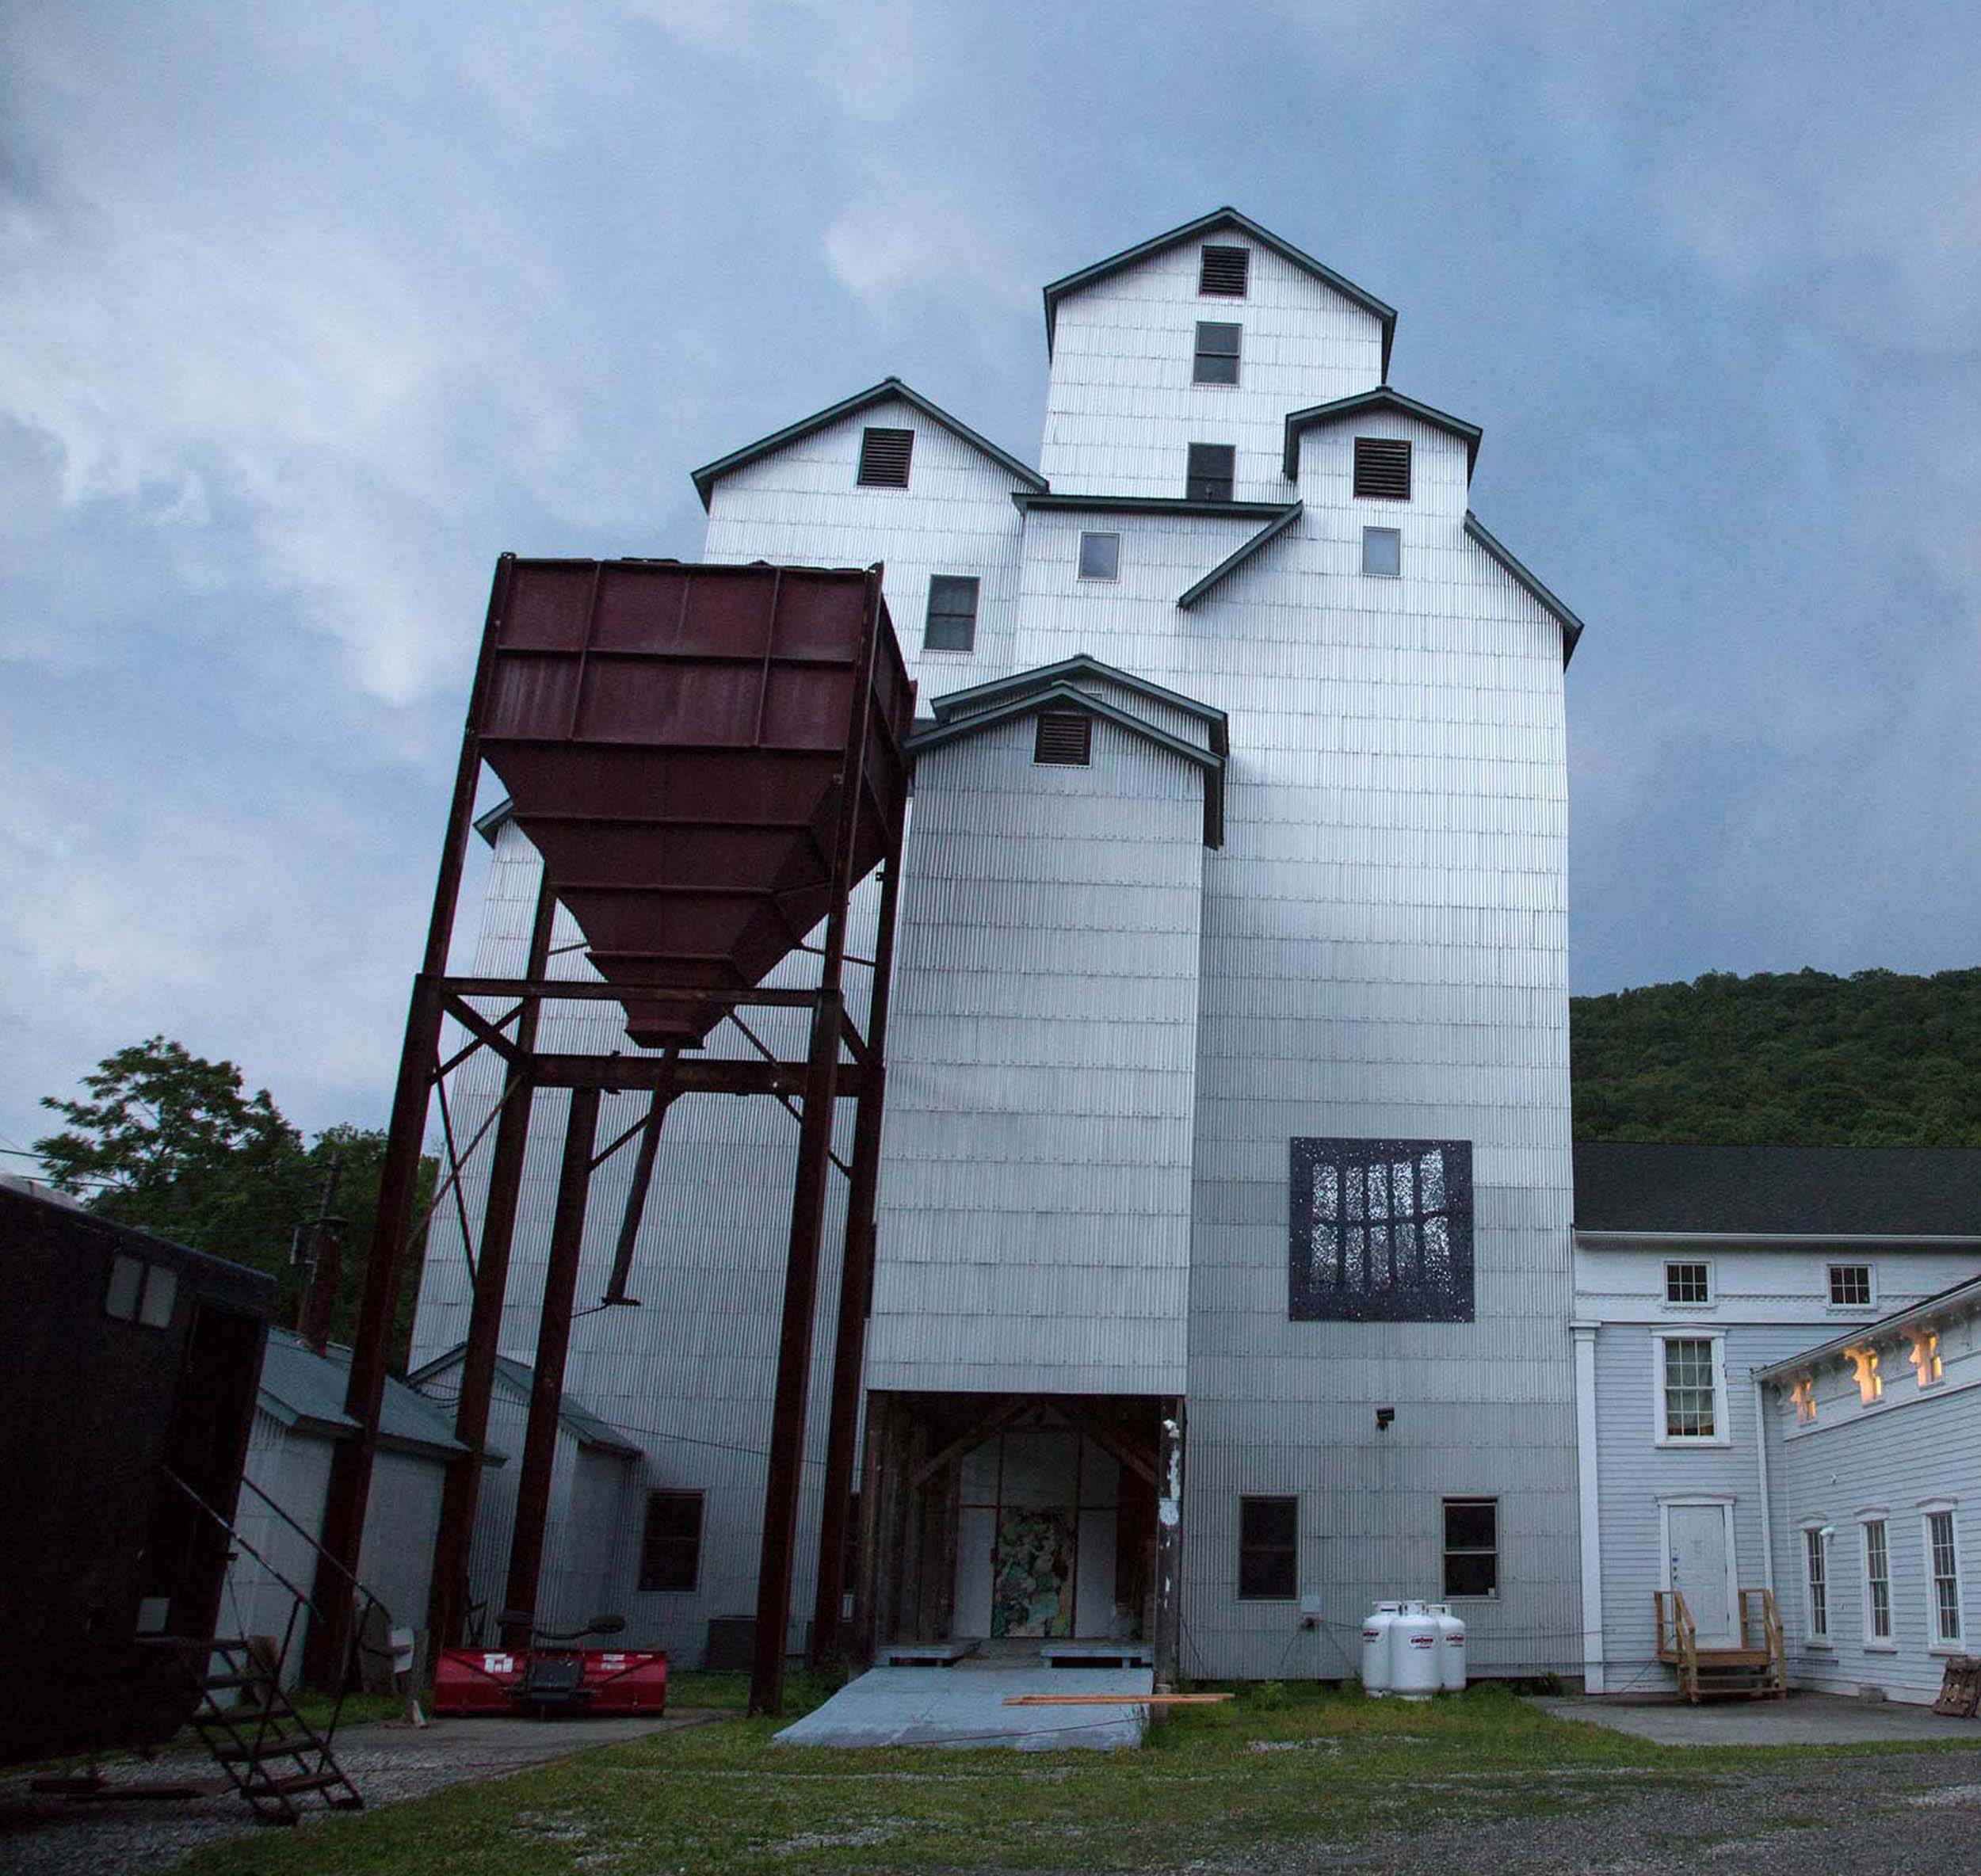 The Maxon Mills converted grain elevator and livestock auction facilities, which now houses the Wassaic Project.